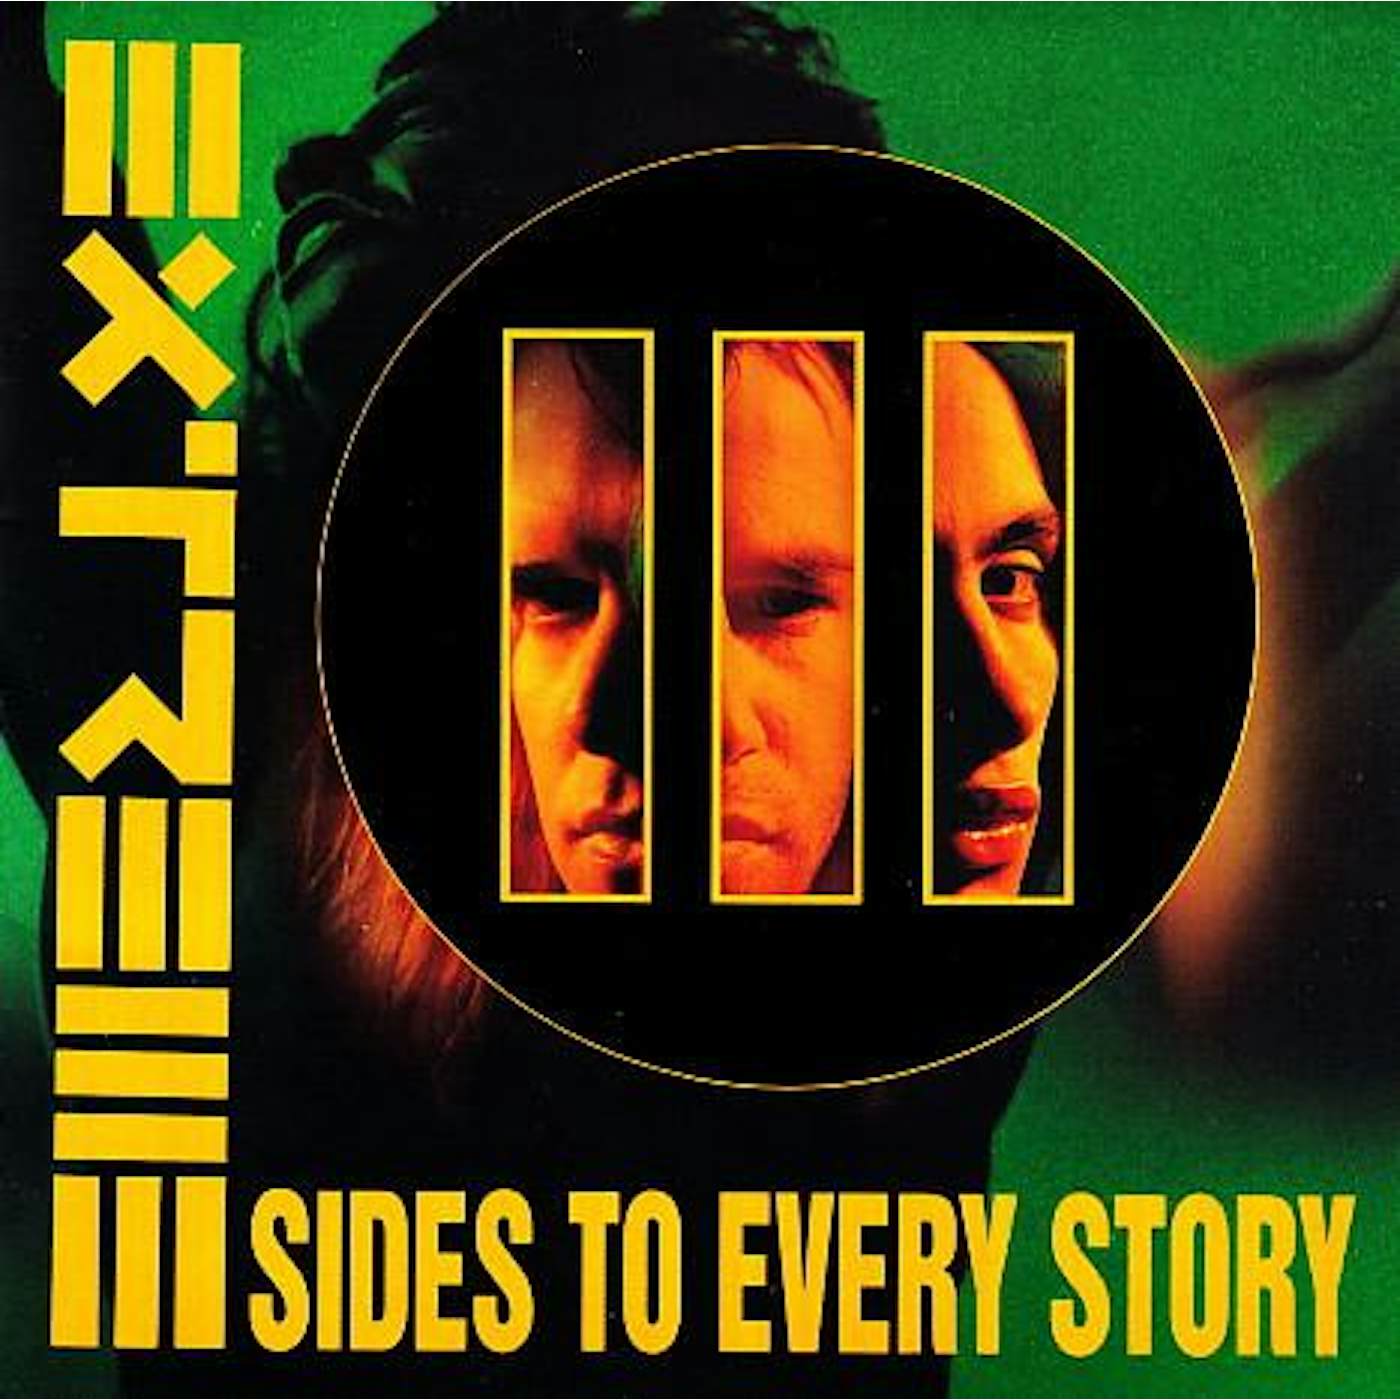 Extreme III SIDES TO EVERY STORY CD